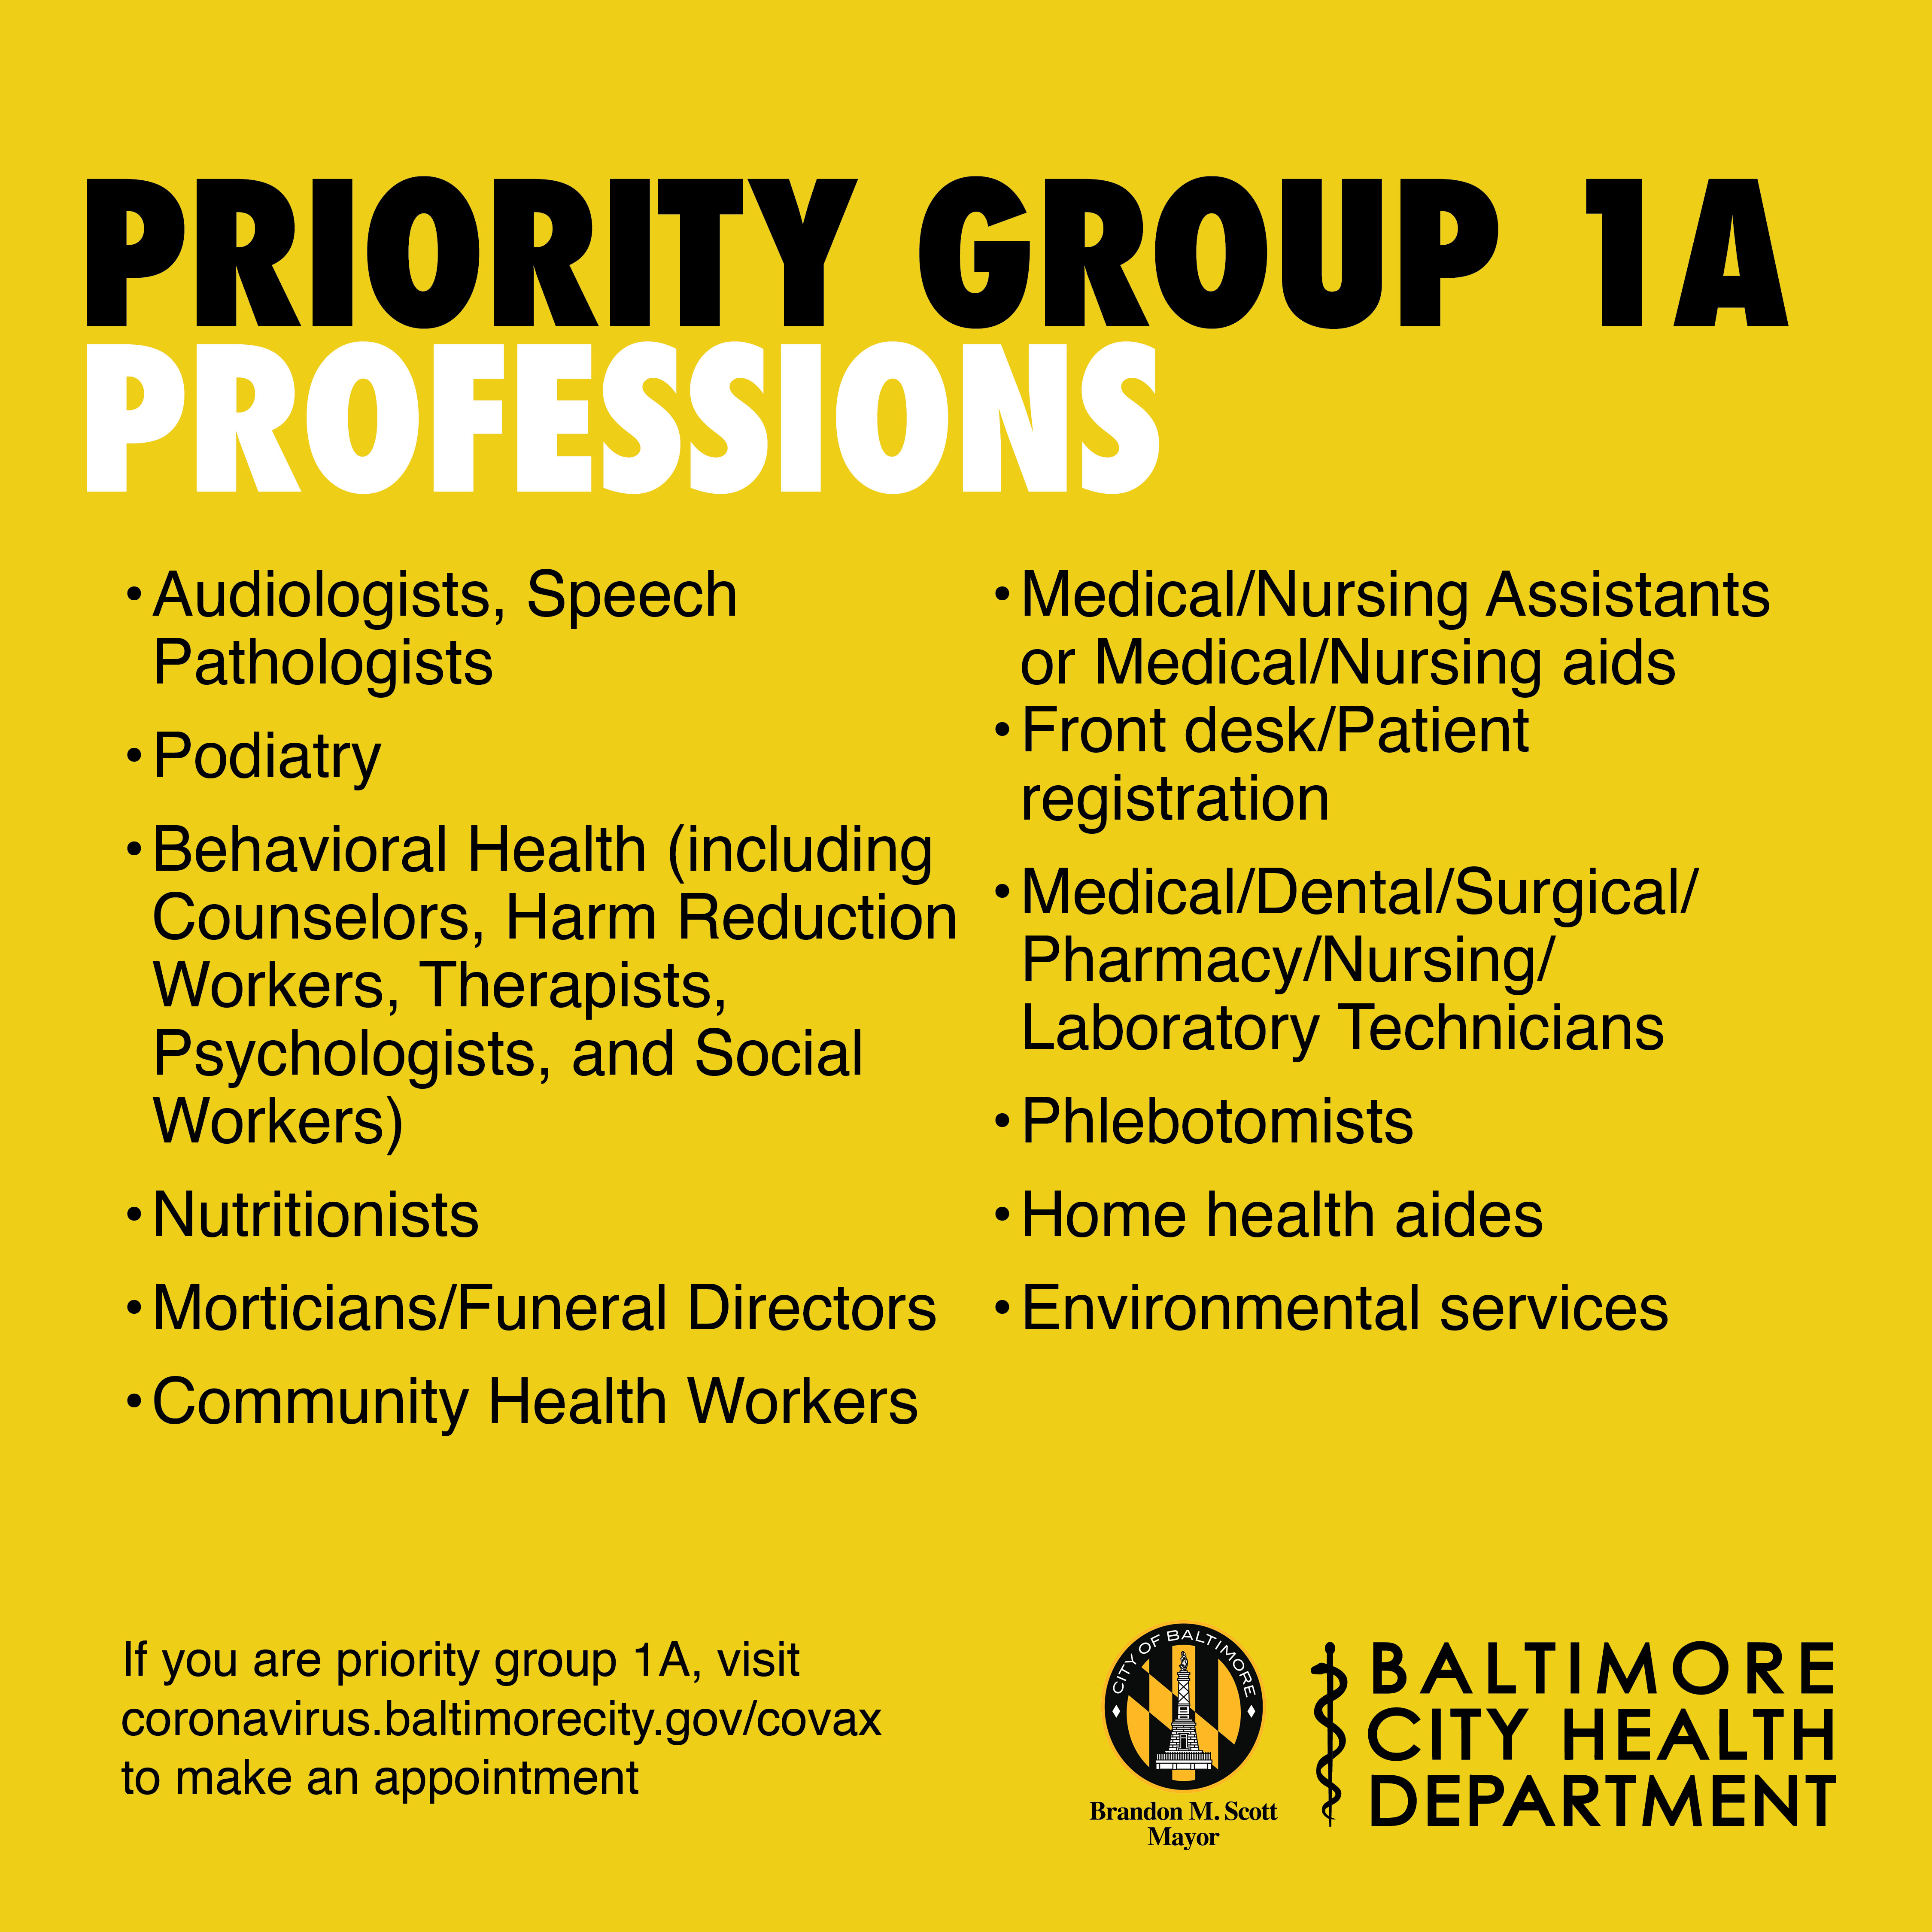 Image is text on yellow background. Text reads Prioirty Group 1A professions, Audiologists, Speech Pathologists Podiatry Behavioral Health (including Counselors, Harm Reduction Workers, Therapists, Psychologists, and Social Workers) Nutritionists Morticia